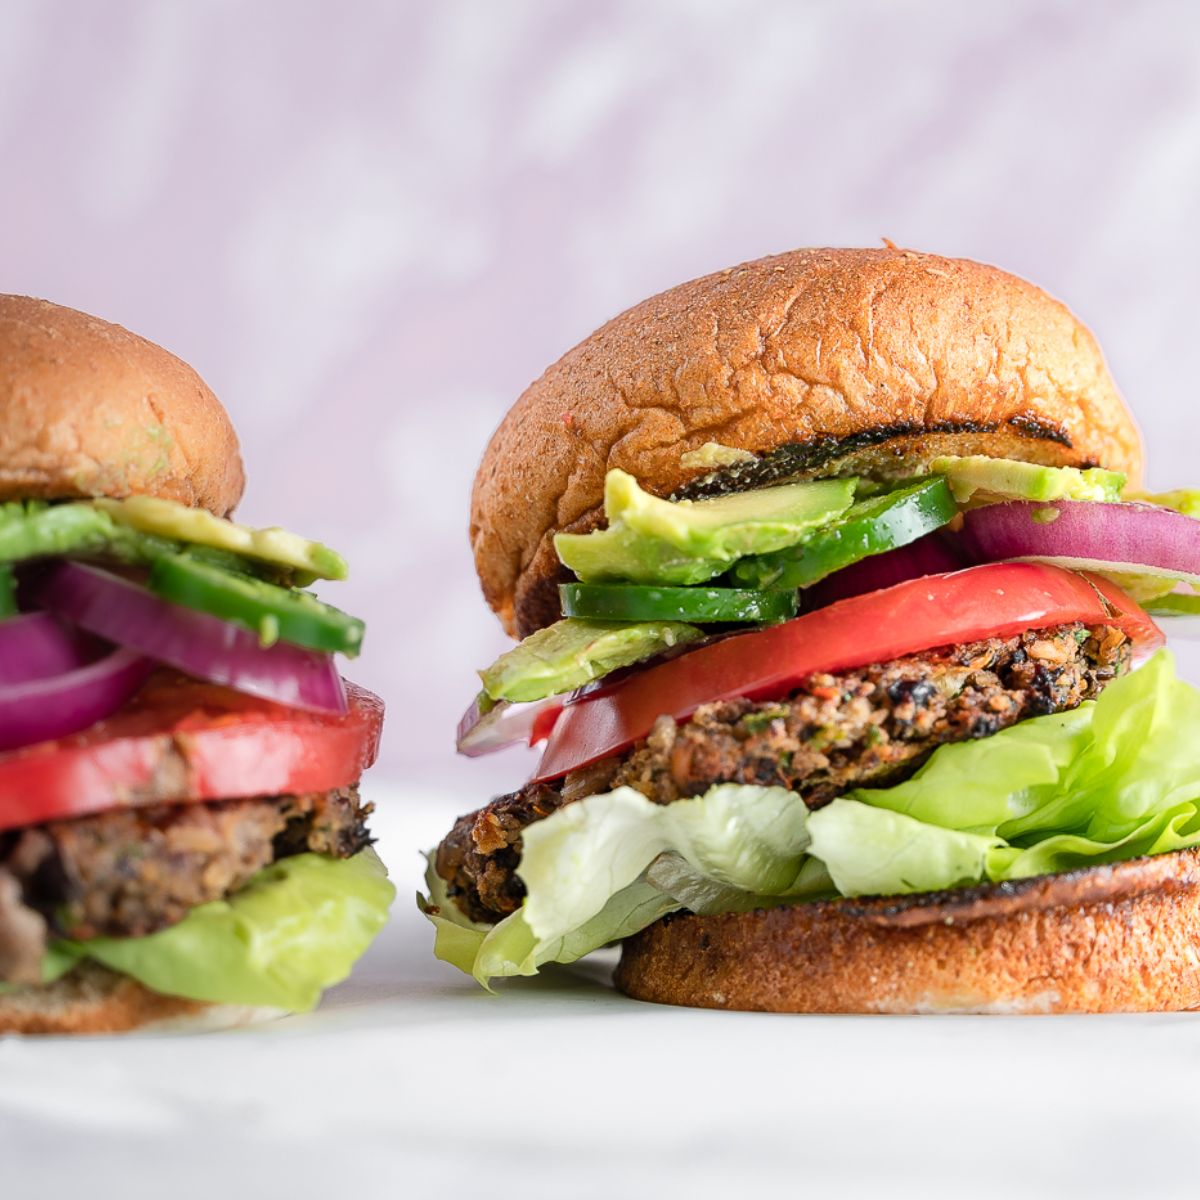 Two burgers with lettuce, tomato, onion, and jalapeno piled high.